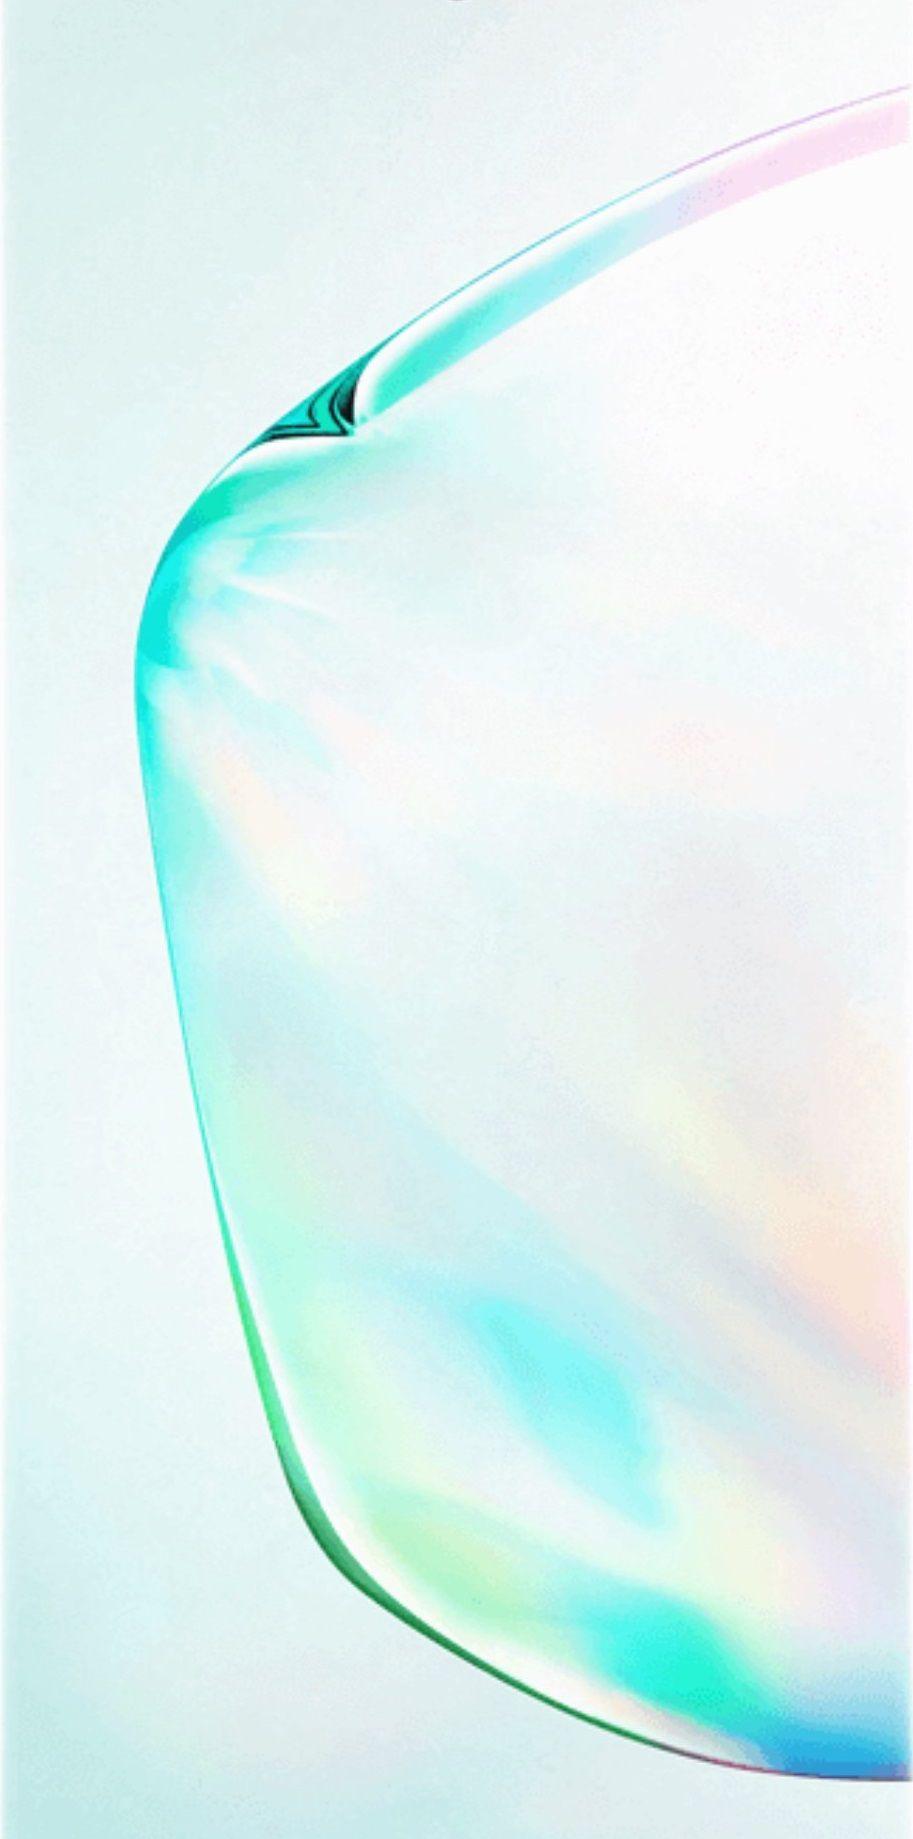 Note 10 Wallpapers HD High Resolution 